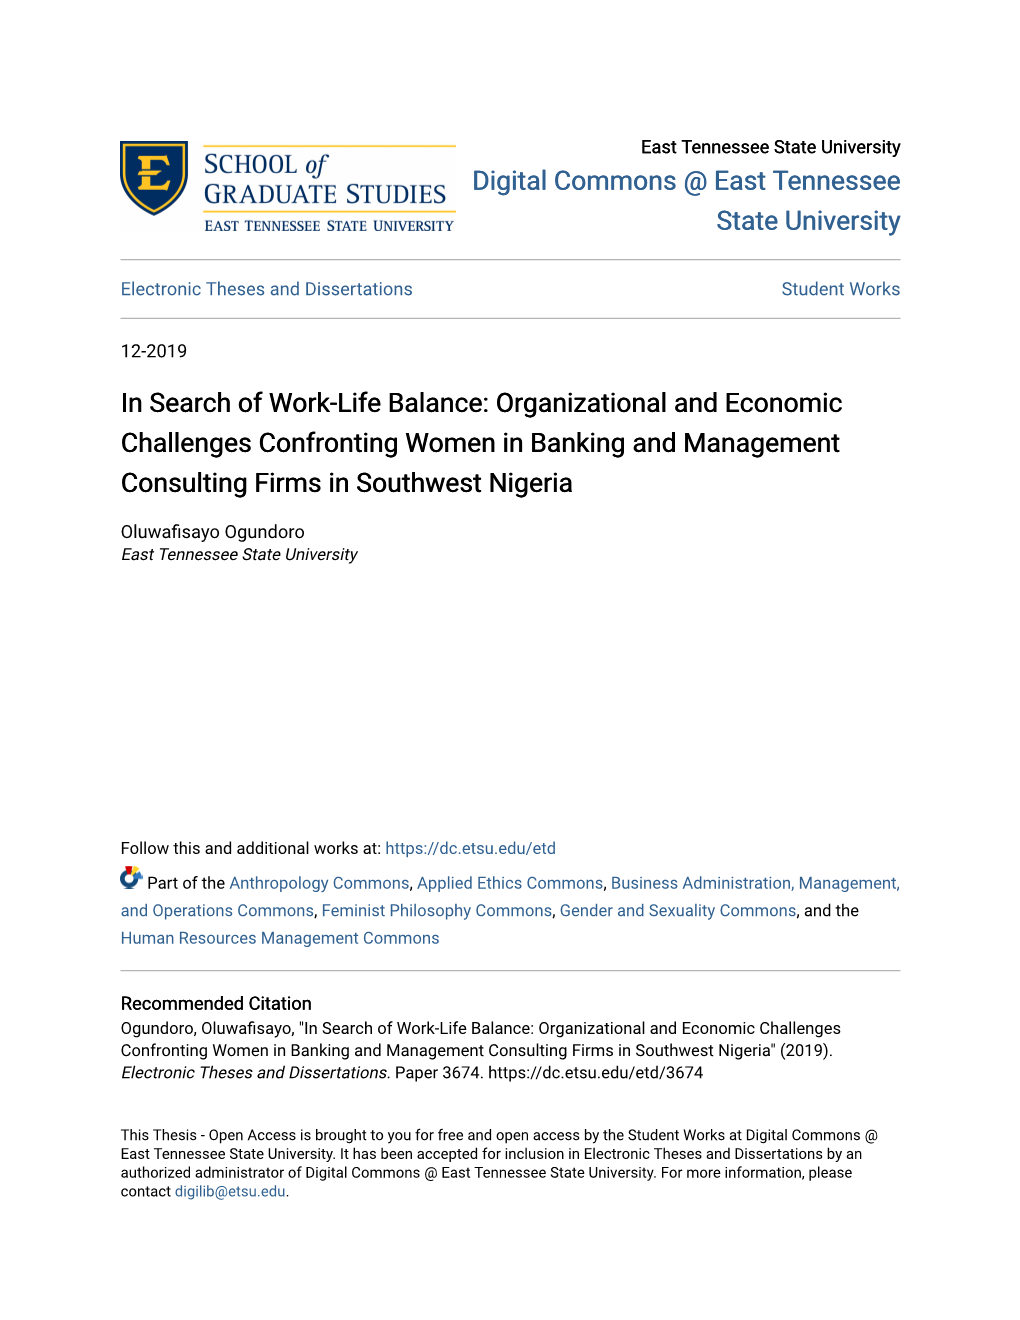 In Search of Work-Life Balance: Organizational and Economic Challenges Confronting Women in Banking and Management Consulting Firms in Southwest Nigeria